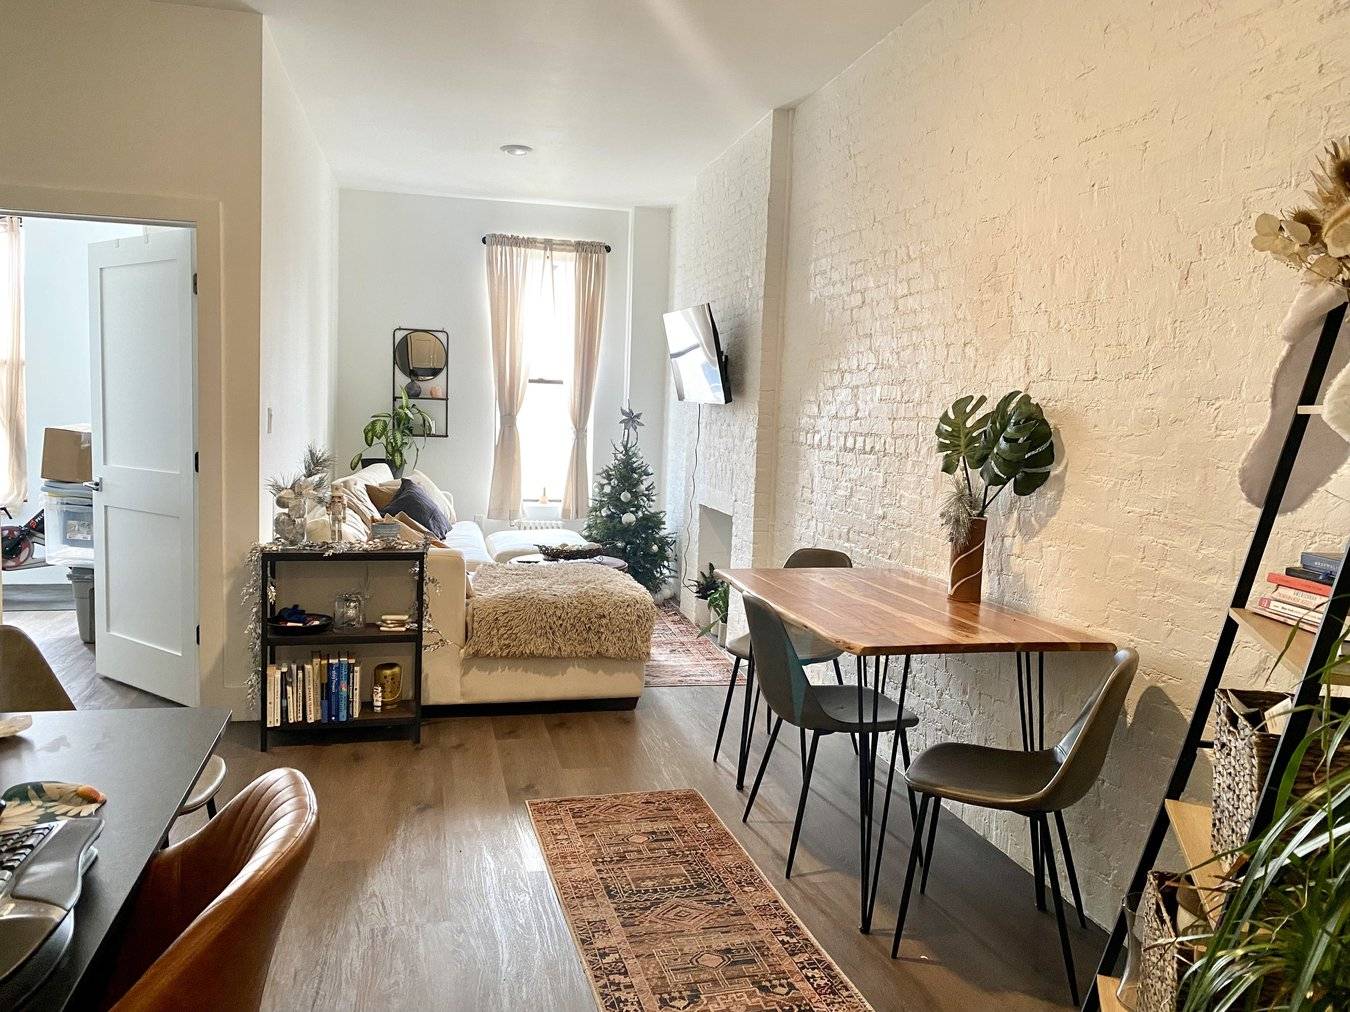 Beautiful 2 Bedroom apartment with exposed brick, decorative fireplace and w d in unit in prime Greenpoint location.